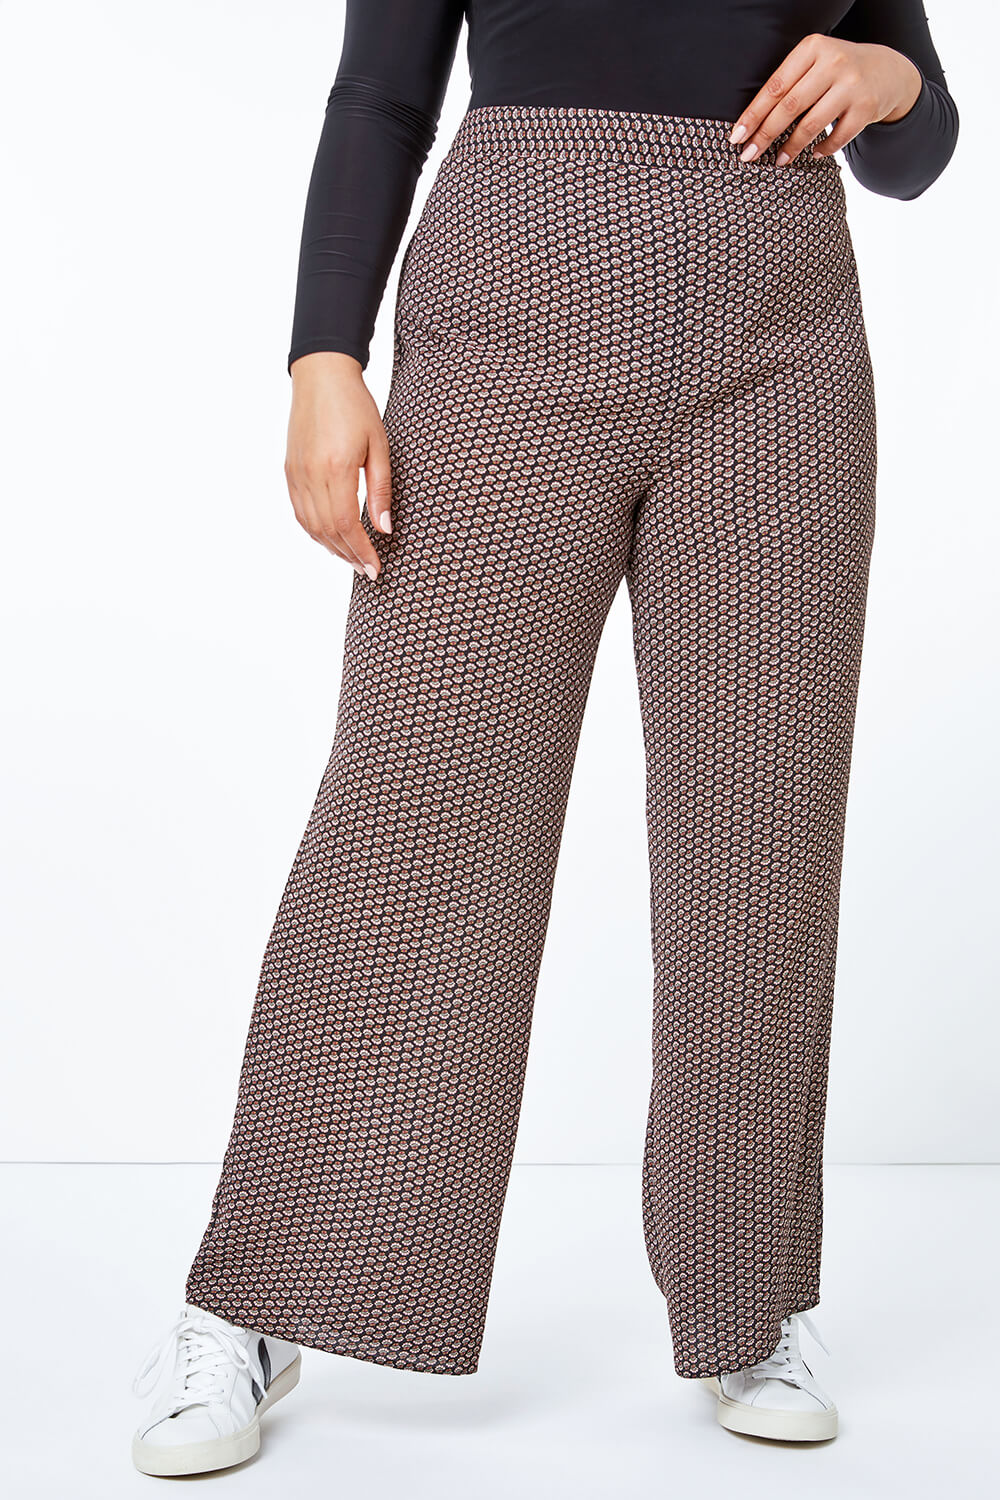 Mocha Curve Printed Wide Leg Trousers, Image 4 of 5